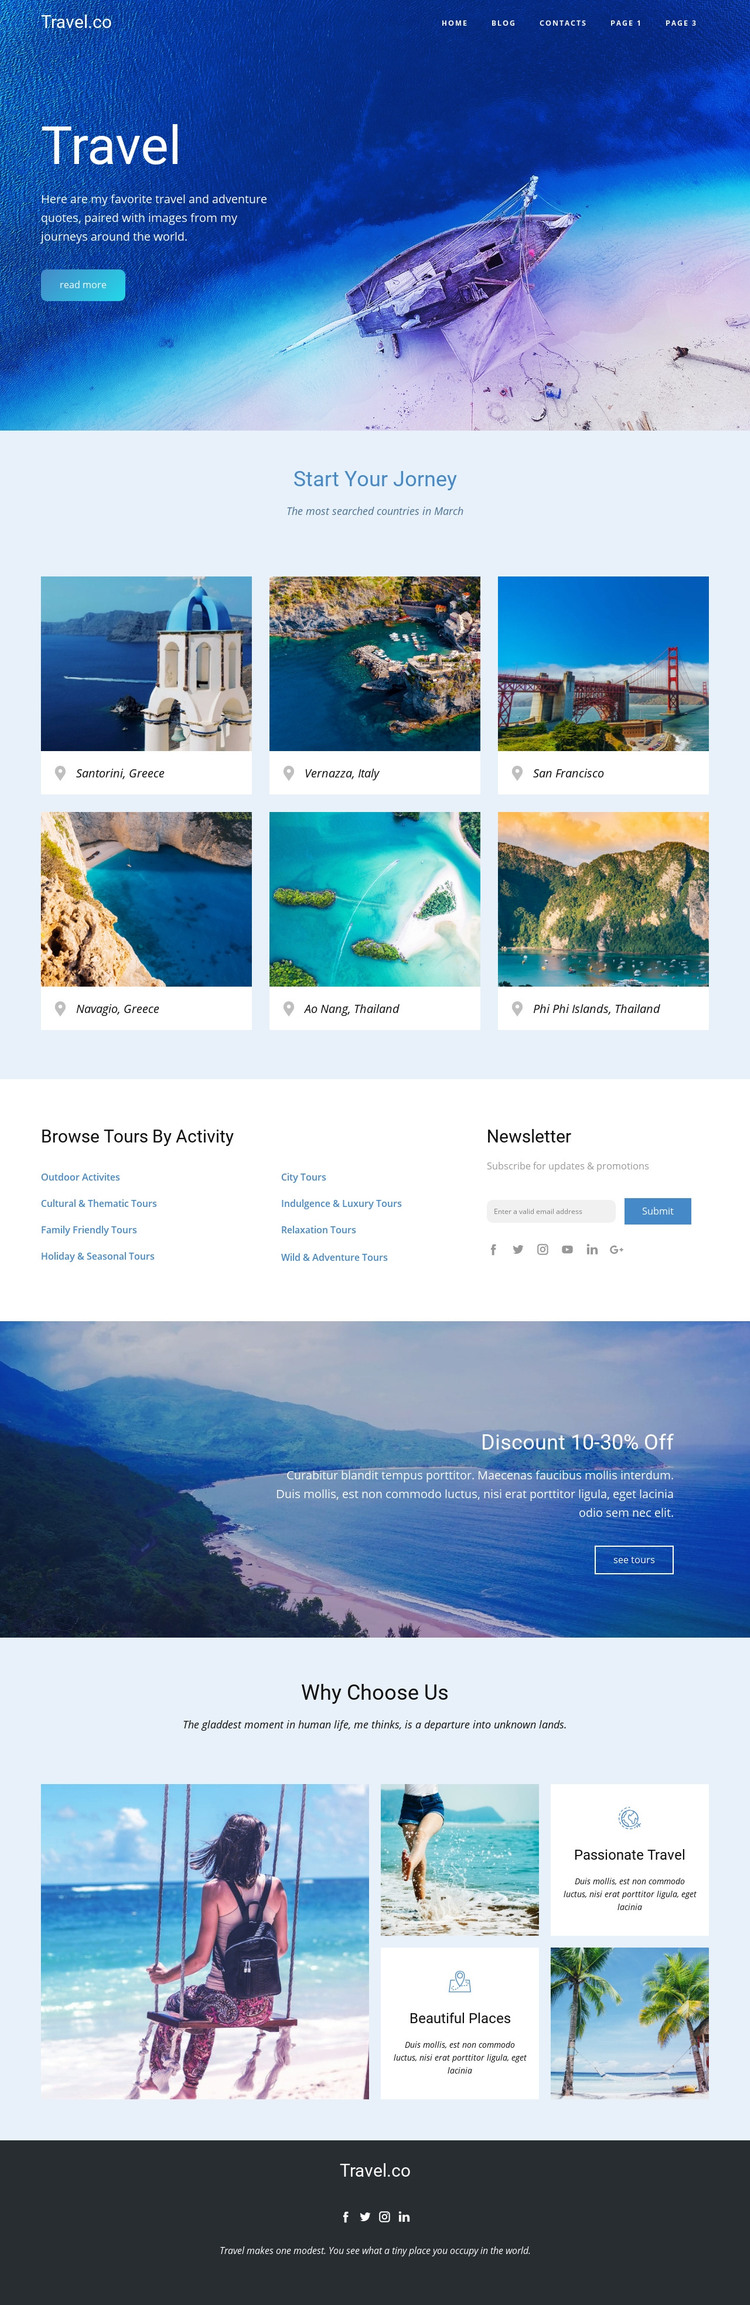 Amazing ideas for travel Homepage Design